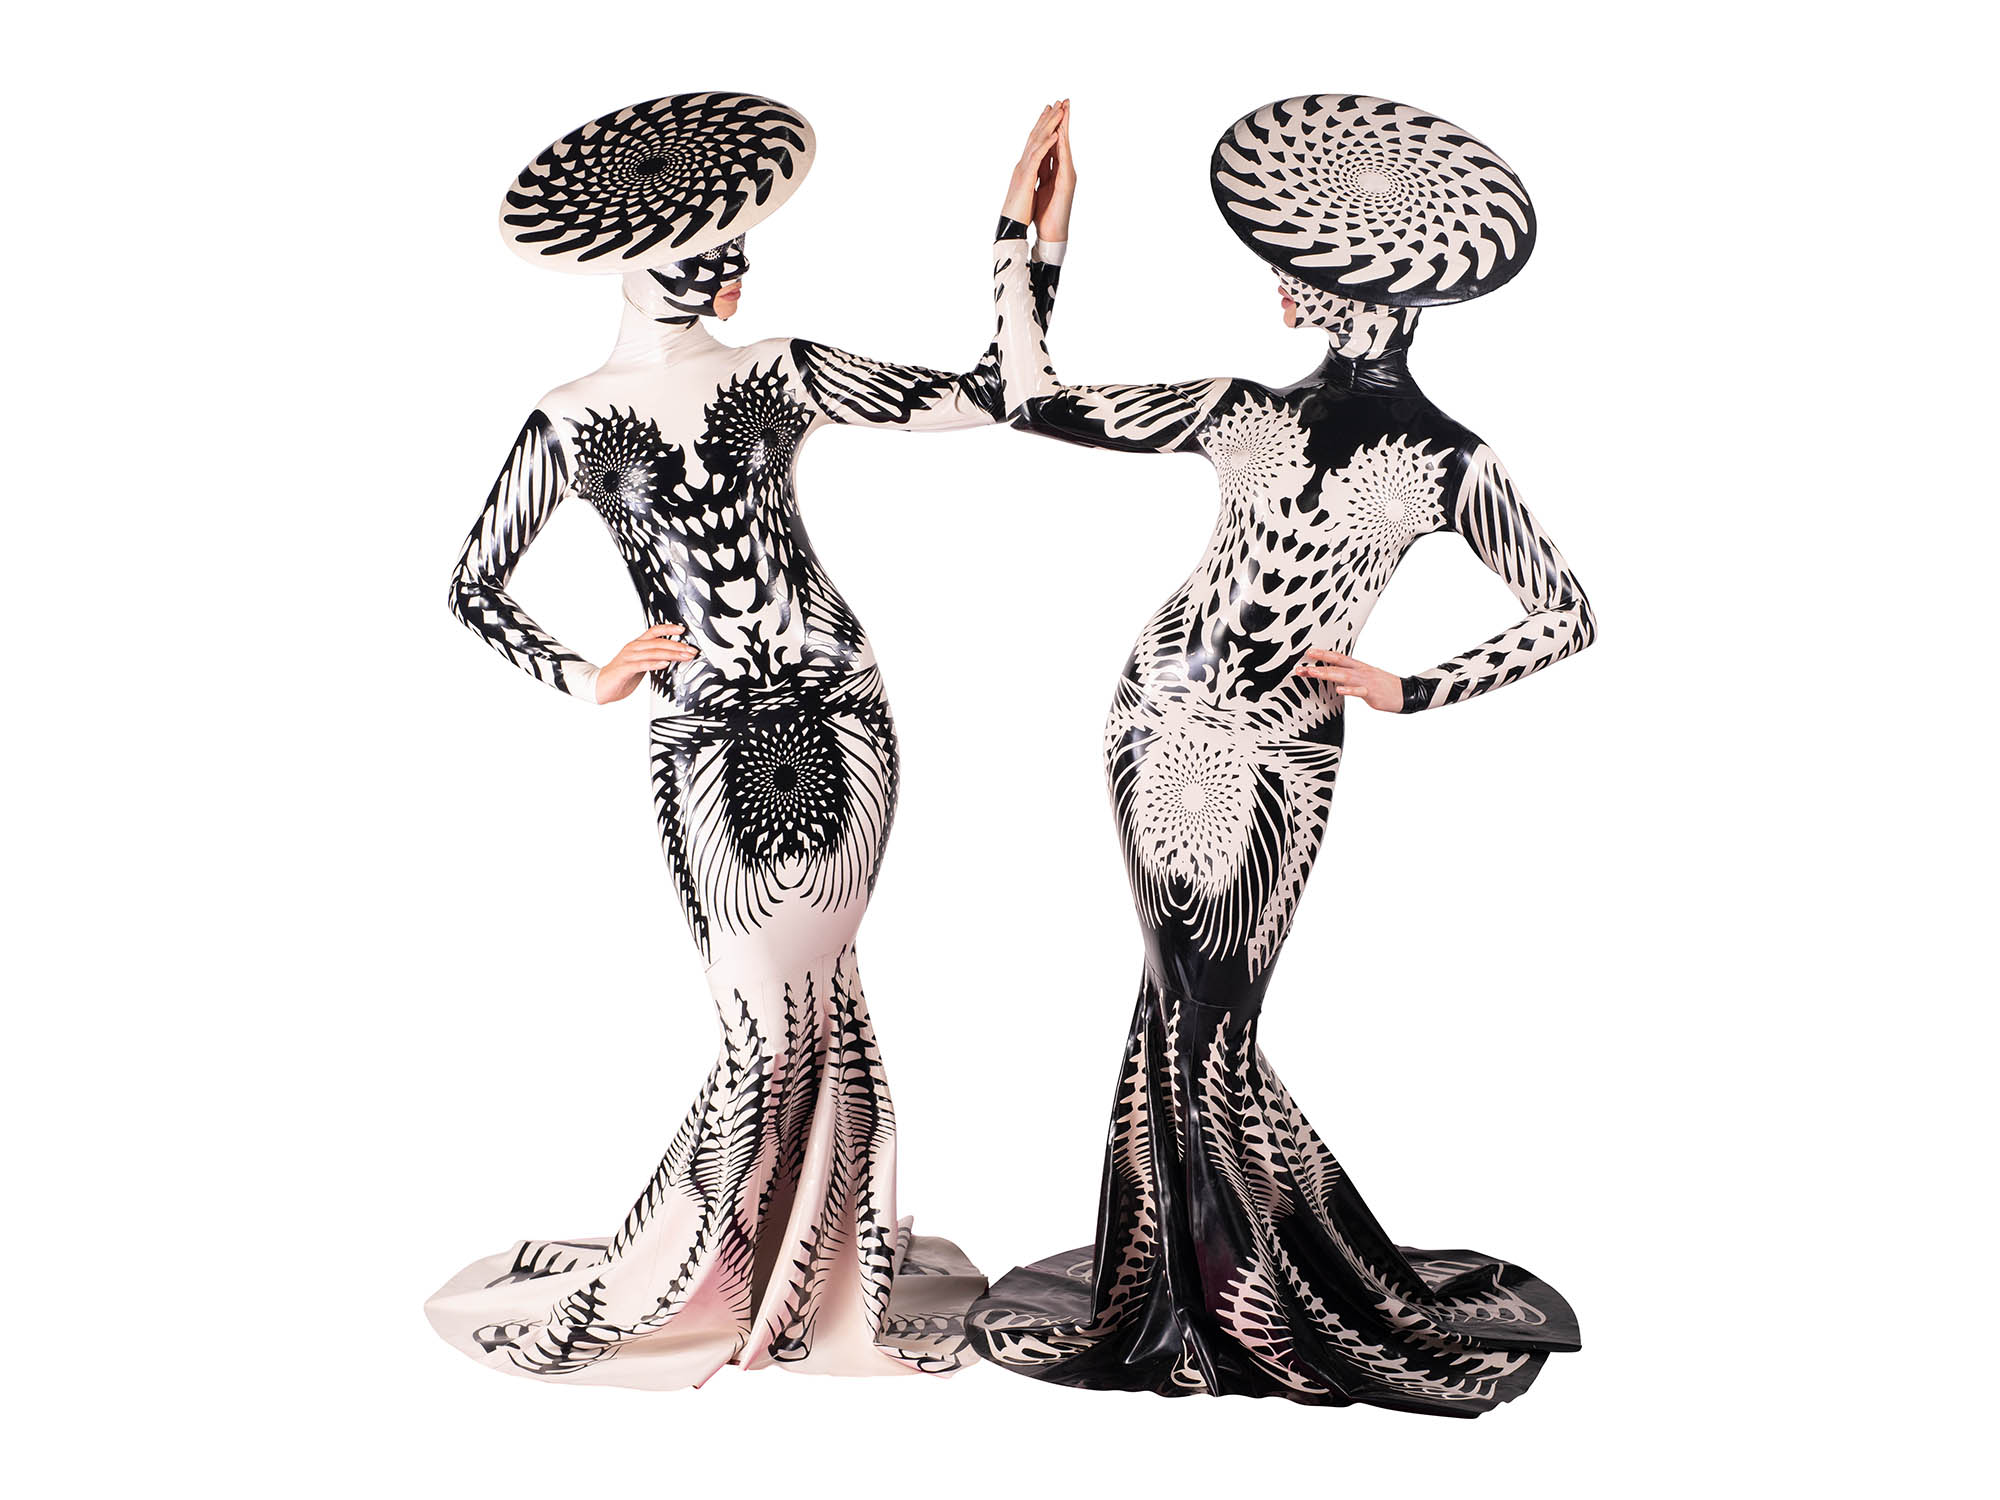 Two people in black and white costumes on a white background